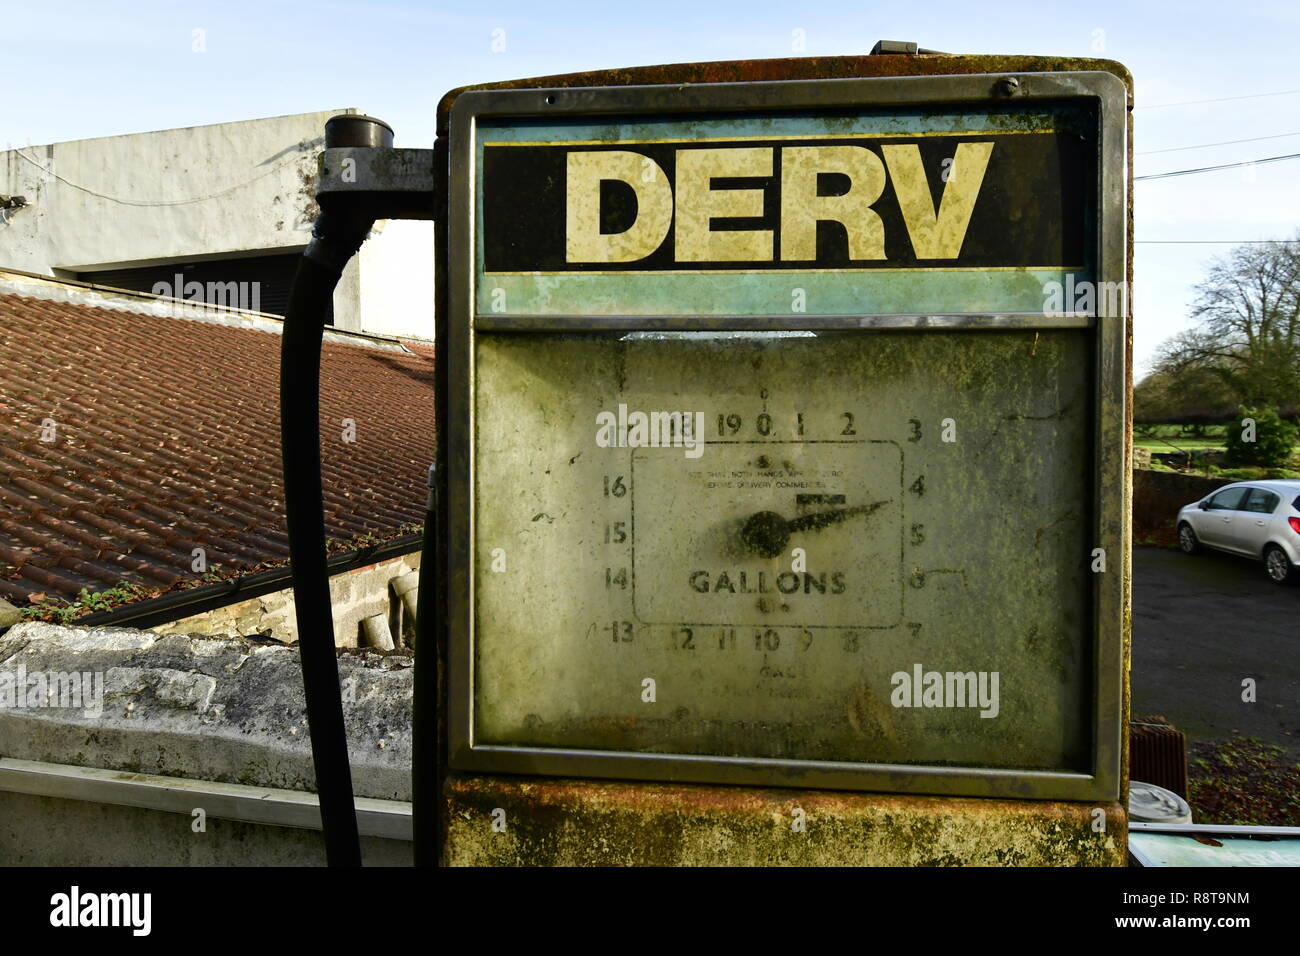 Very old petrol and derv (diesel) pumps seen on the Mendips in Somerset. Robert Timoney..Alamy/Stock/Image Stock Photo